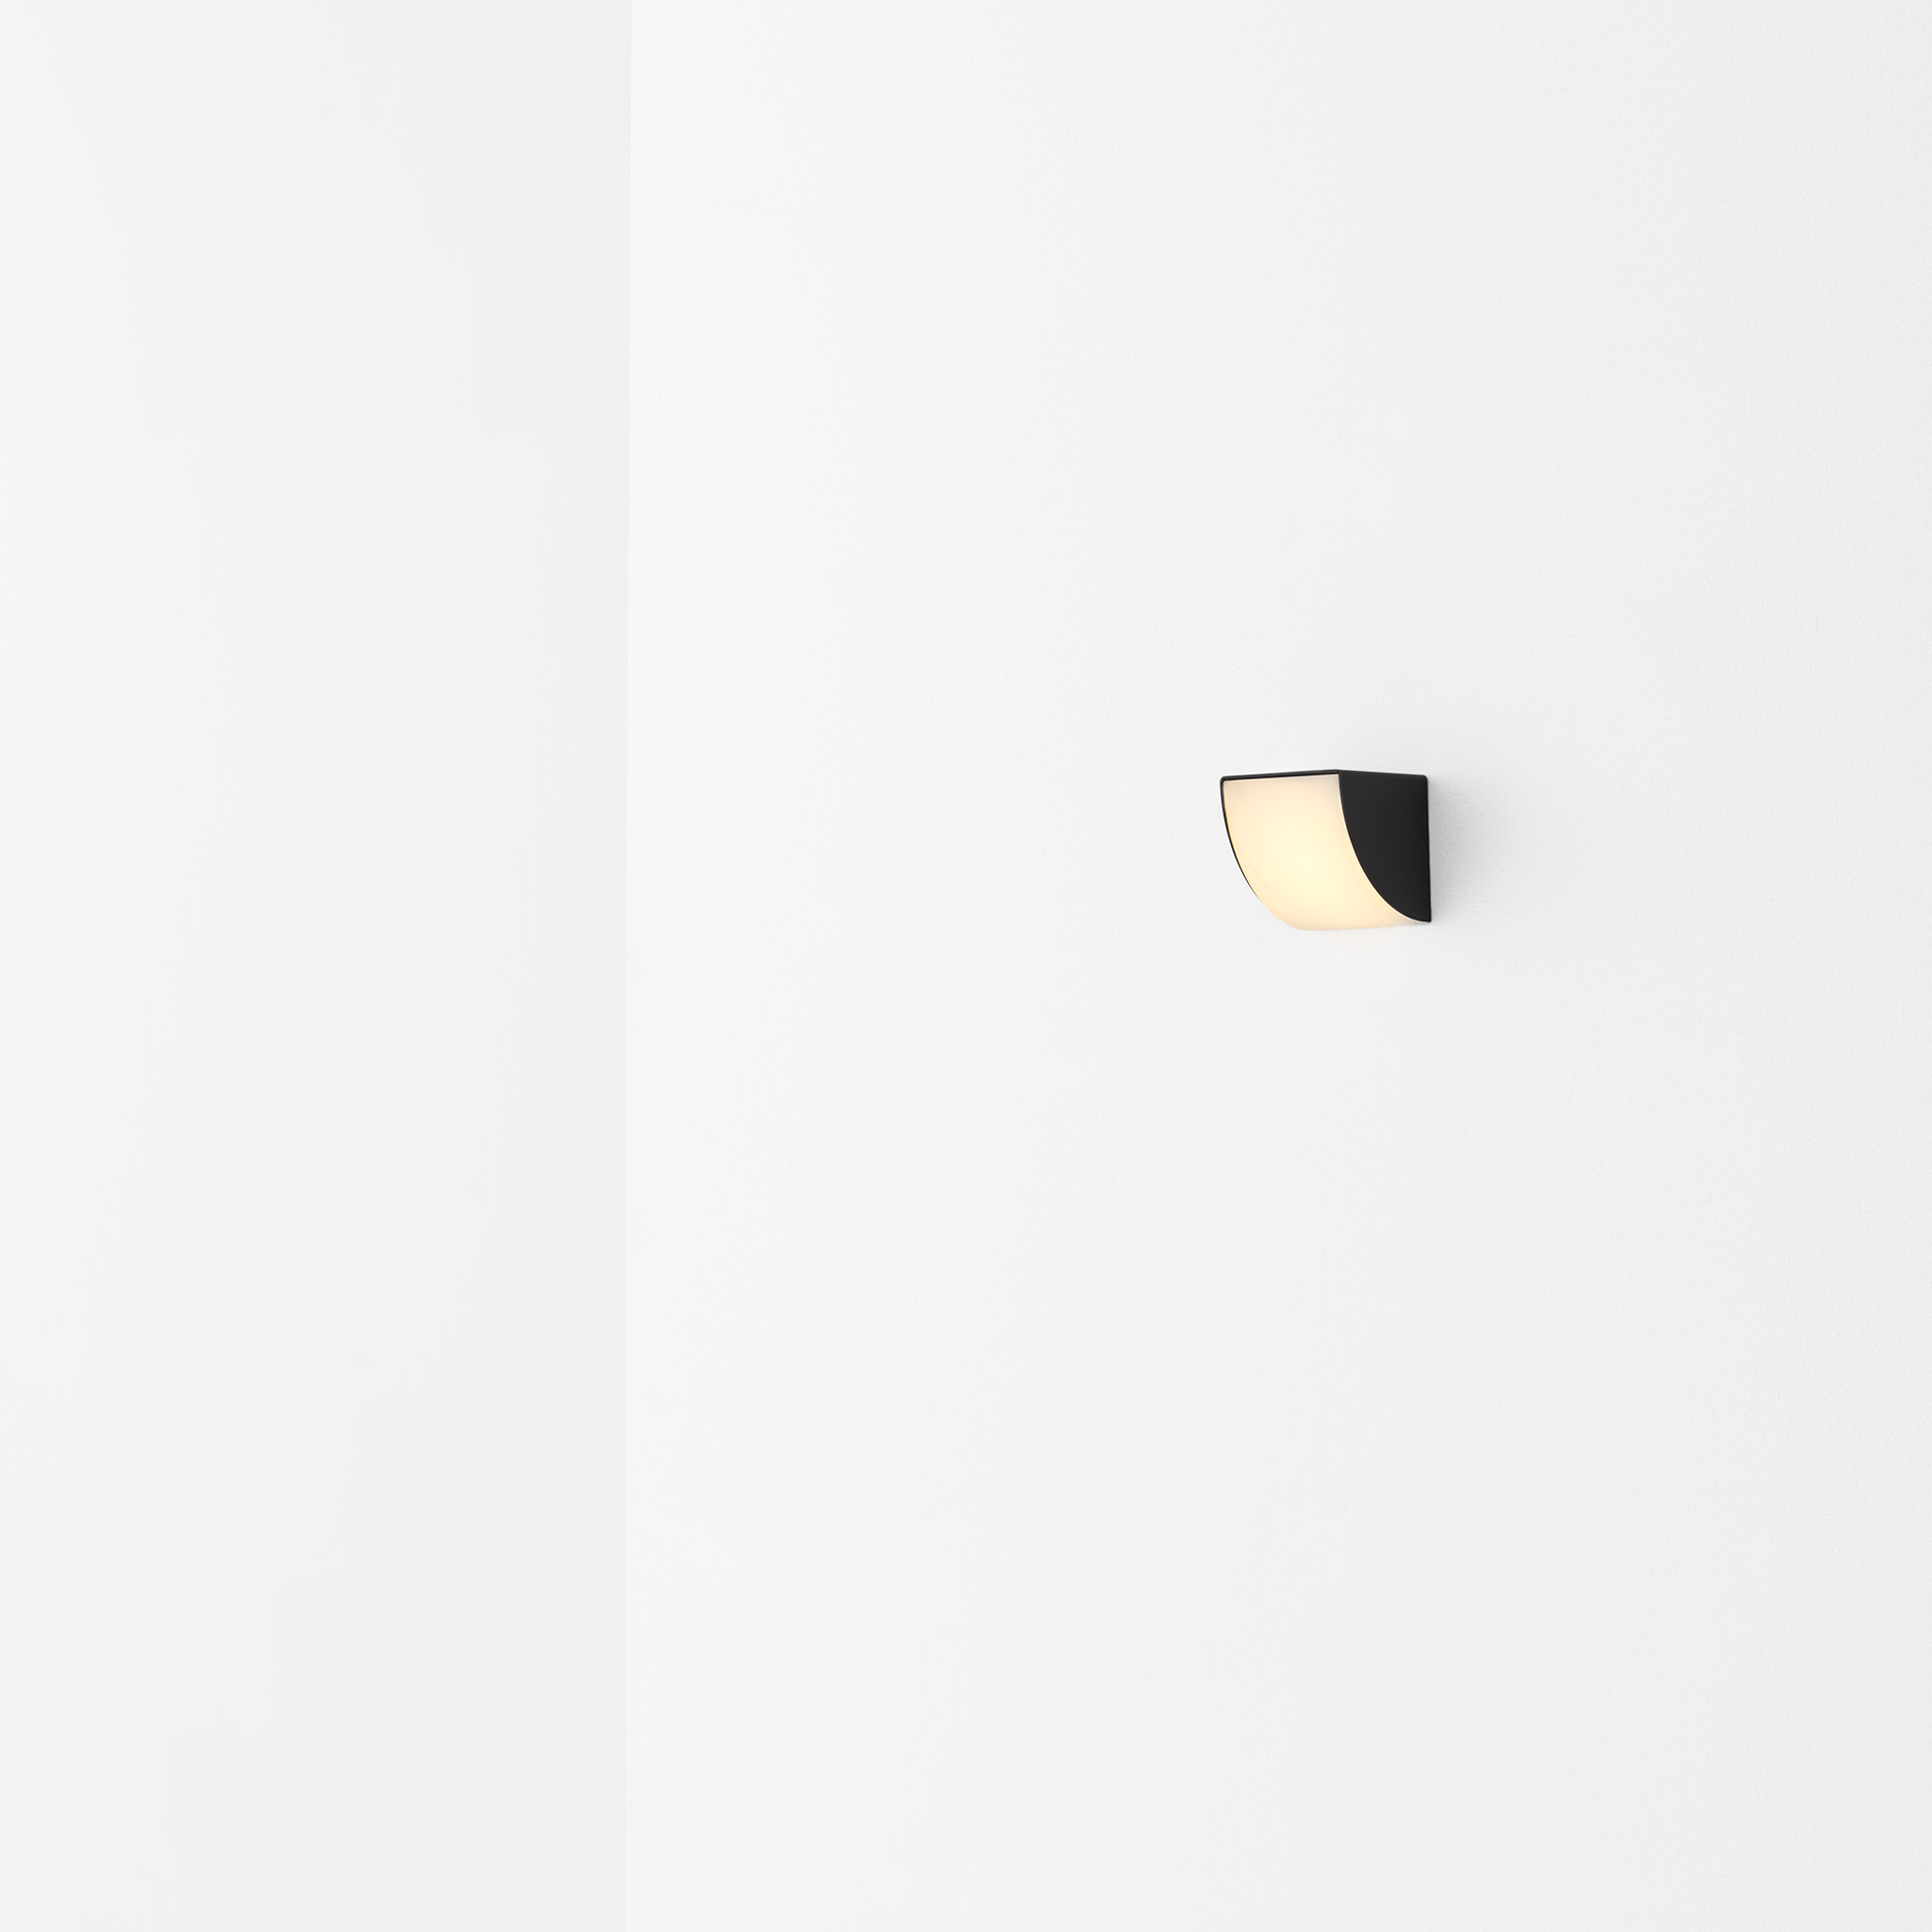 Phase Wall Sconce